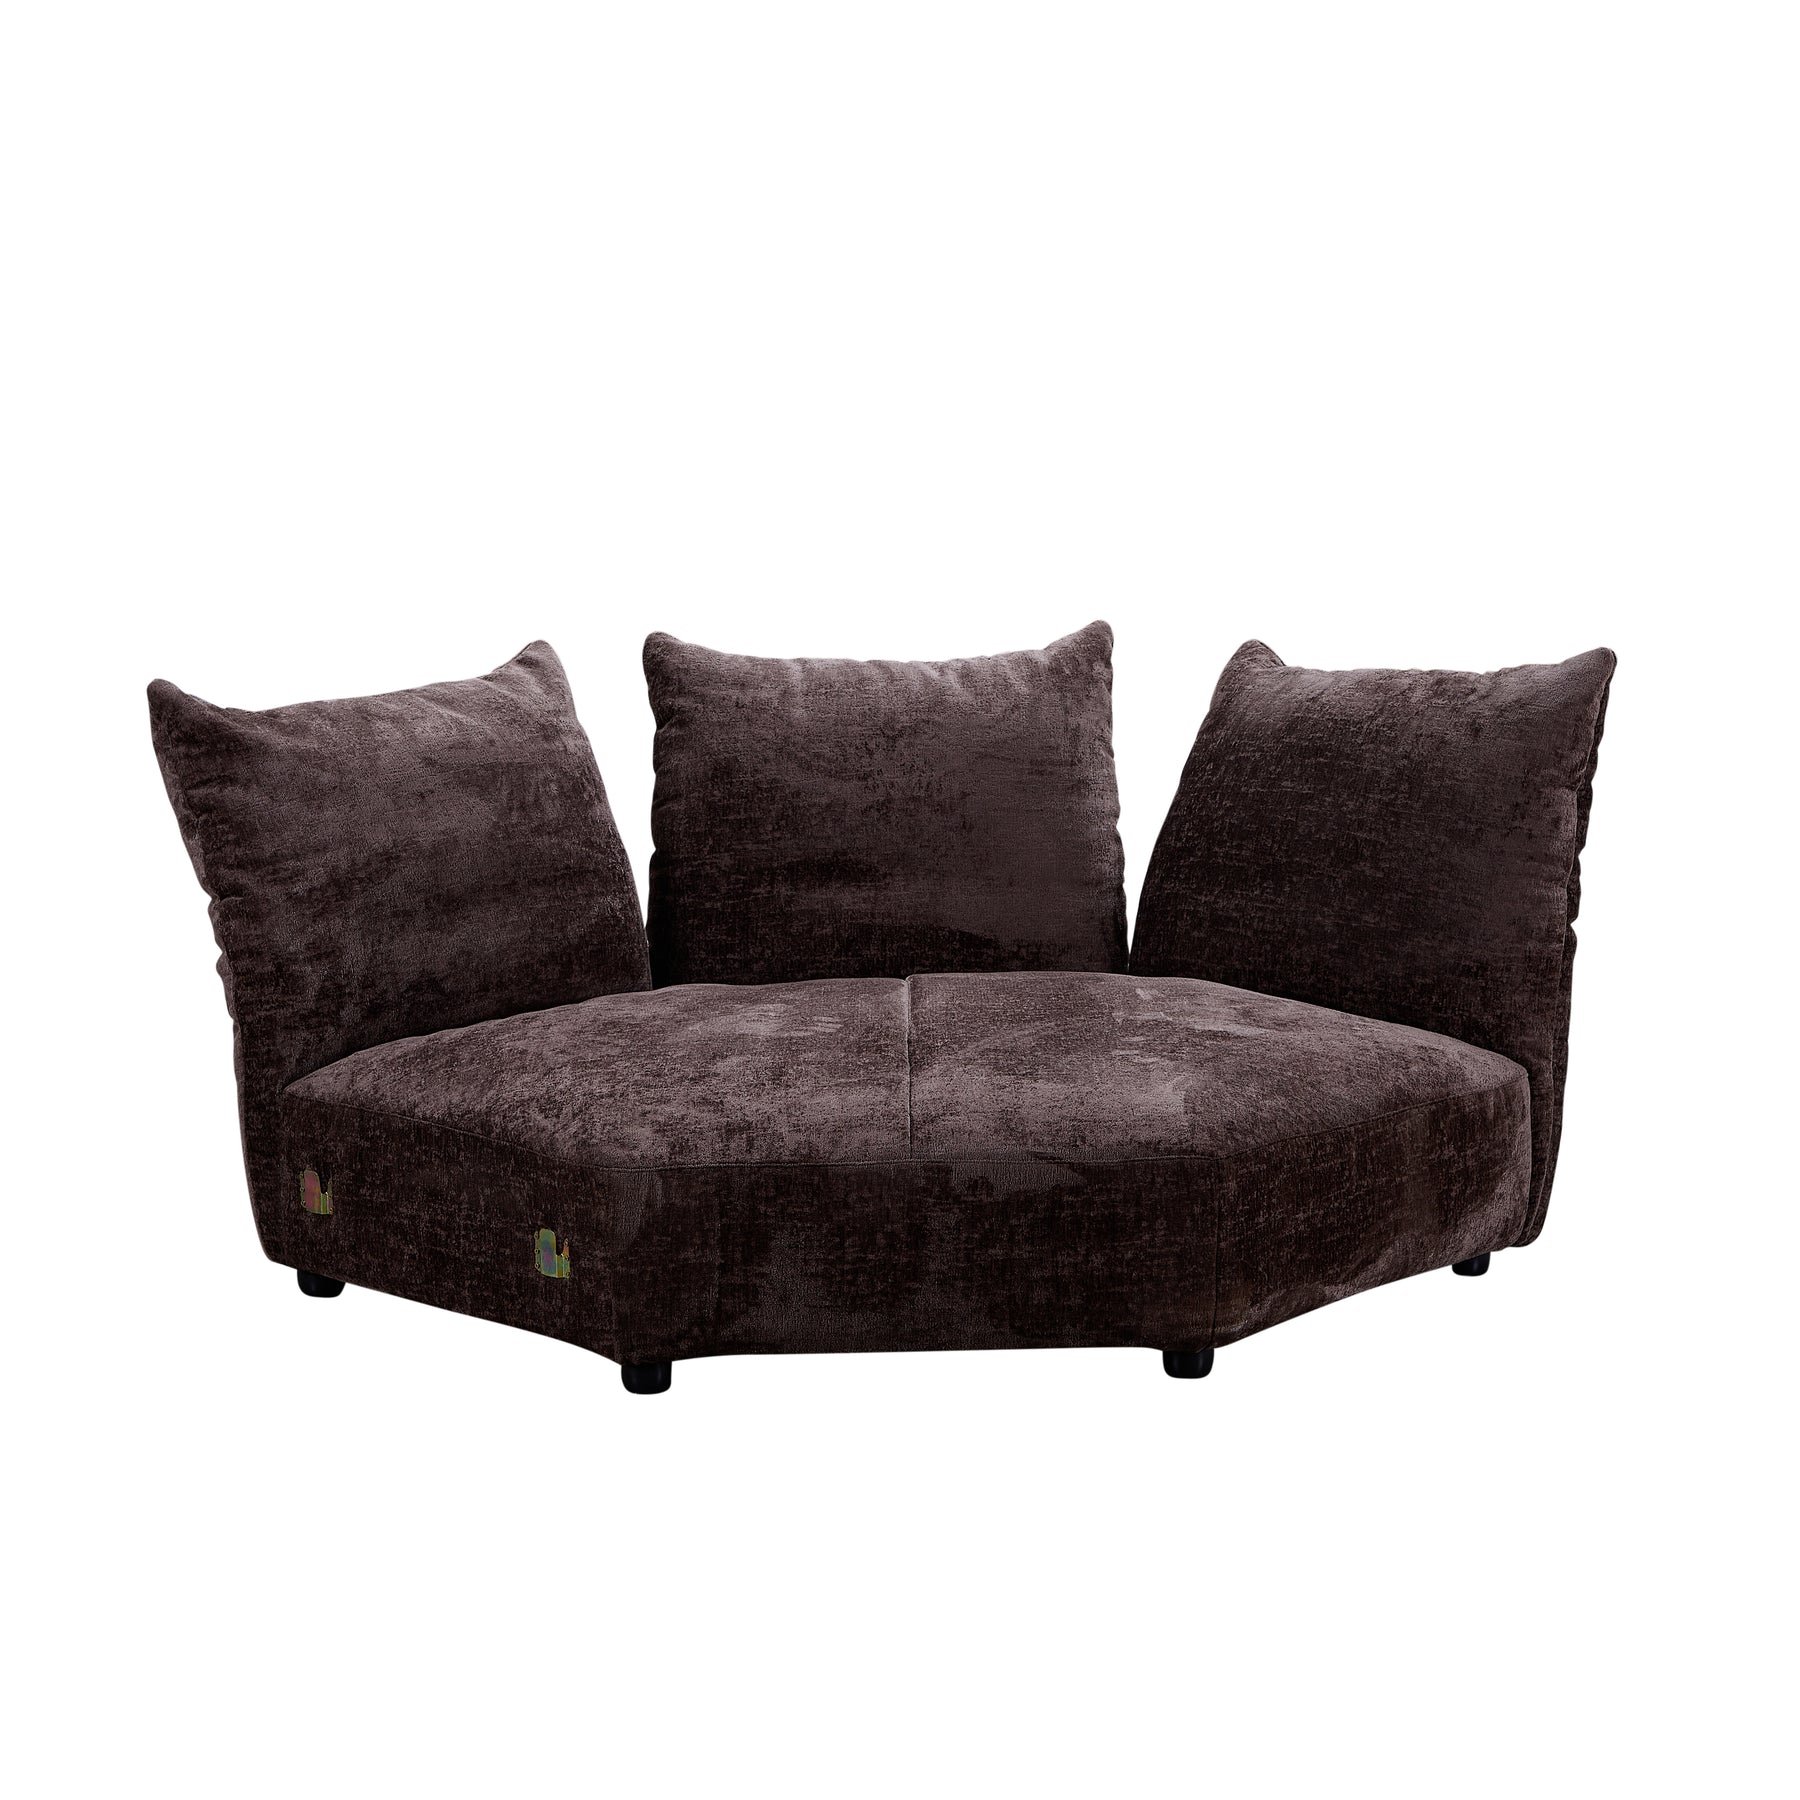 Modular Sofa with Moving Backrest - Brown